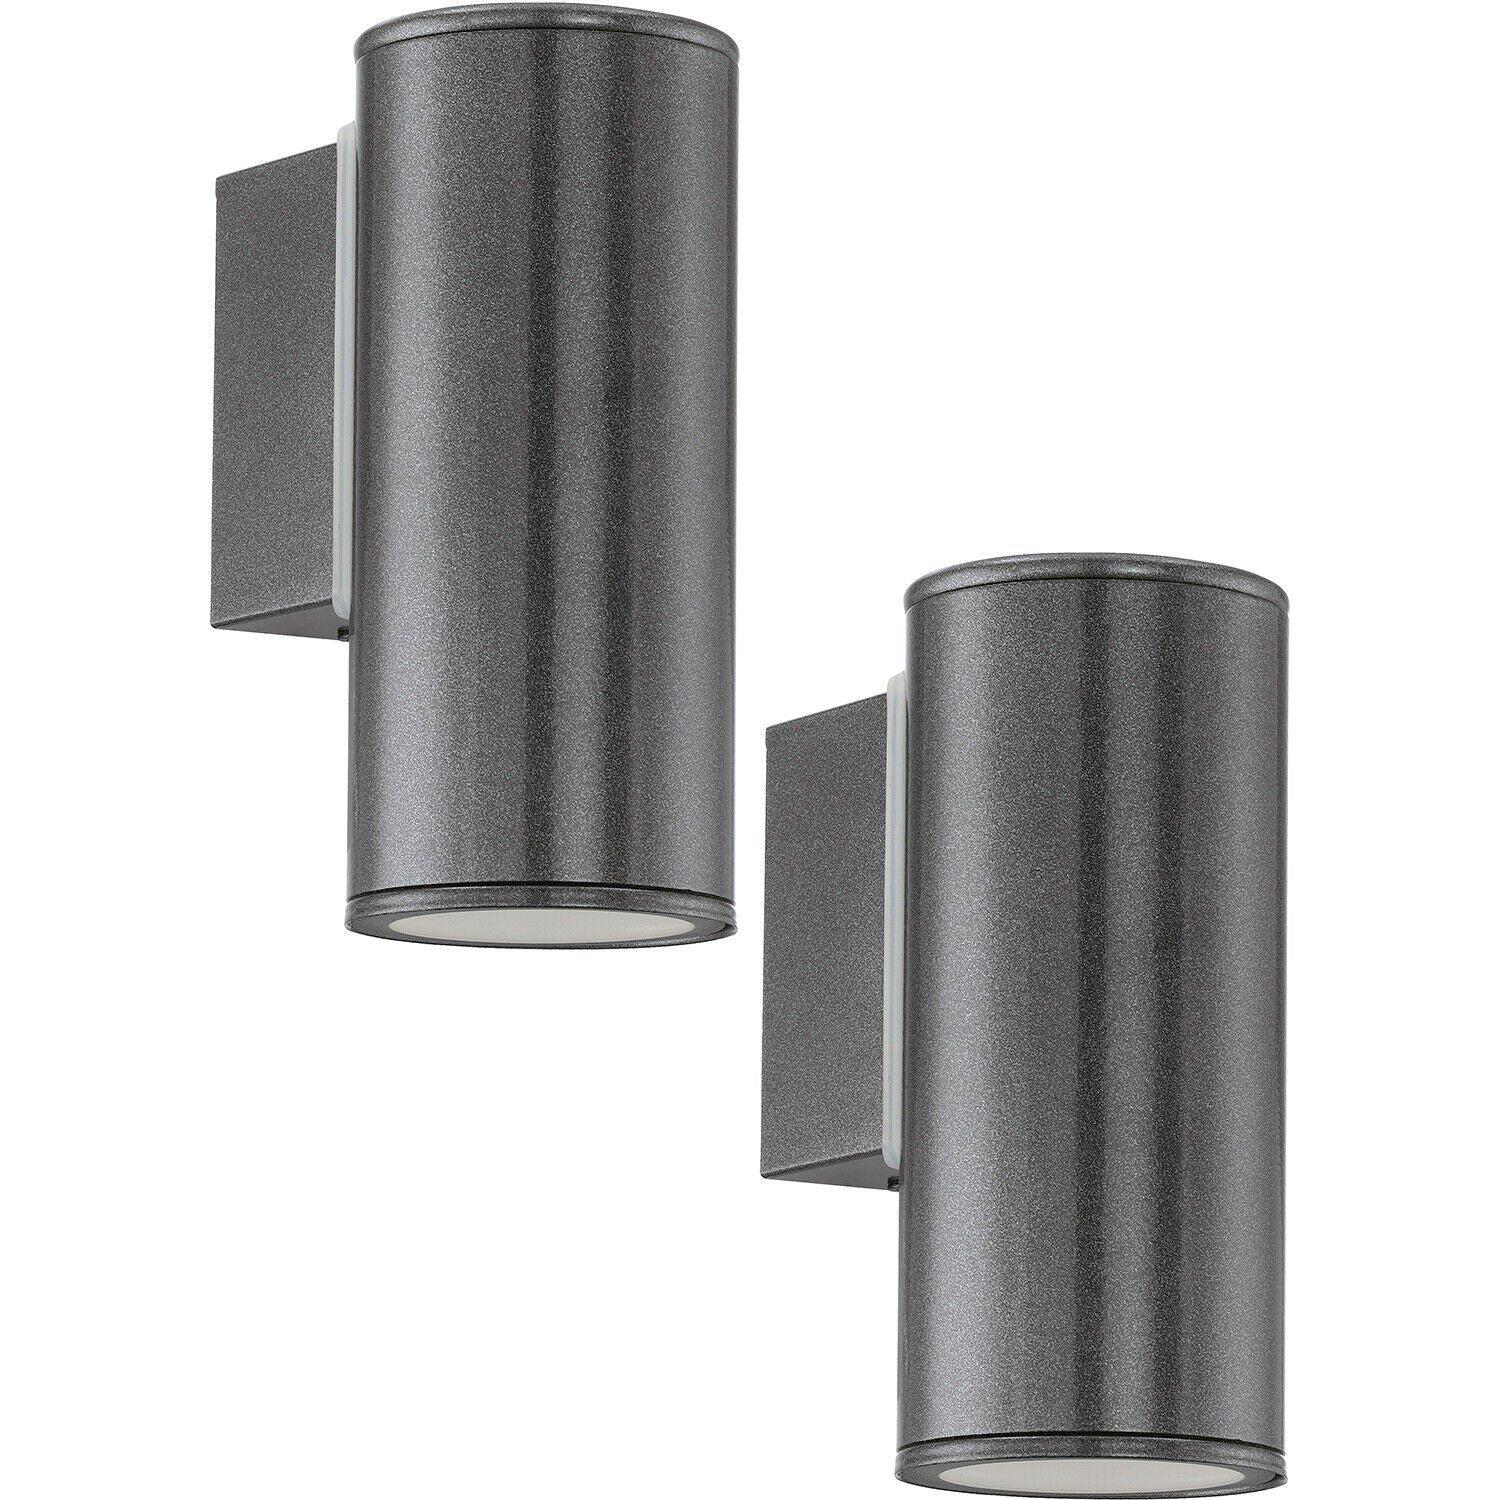 2 PACK IP44 Outdoor Wall Light Anthracite Zinc Plated Steel 1x 3W GU10